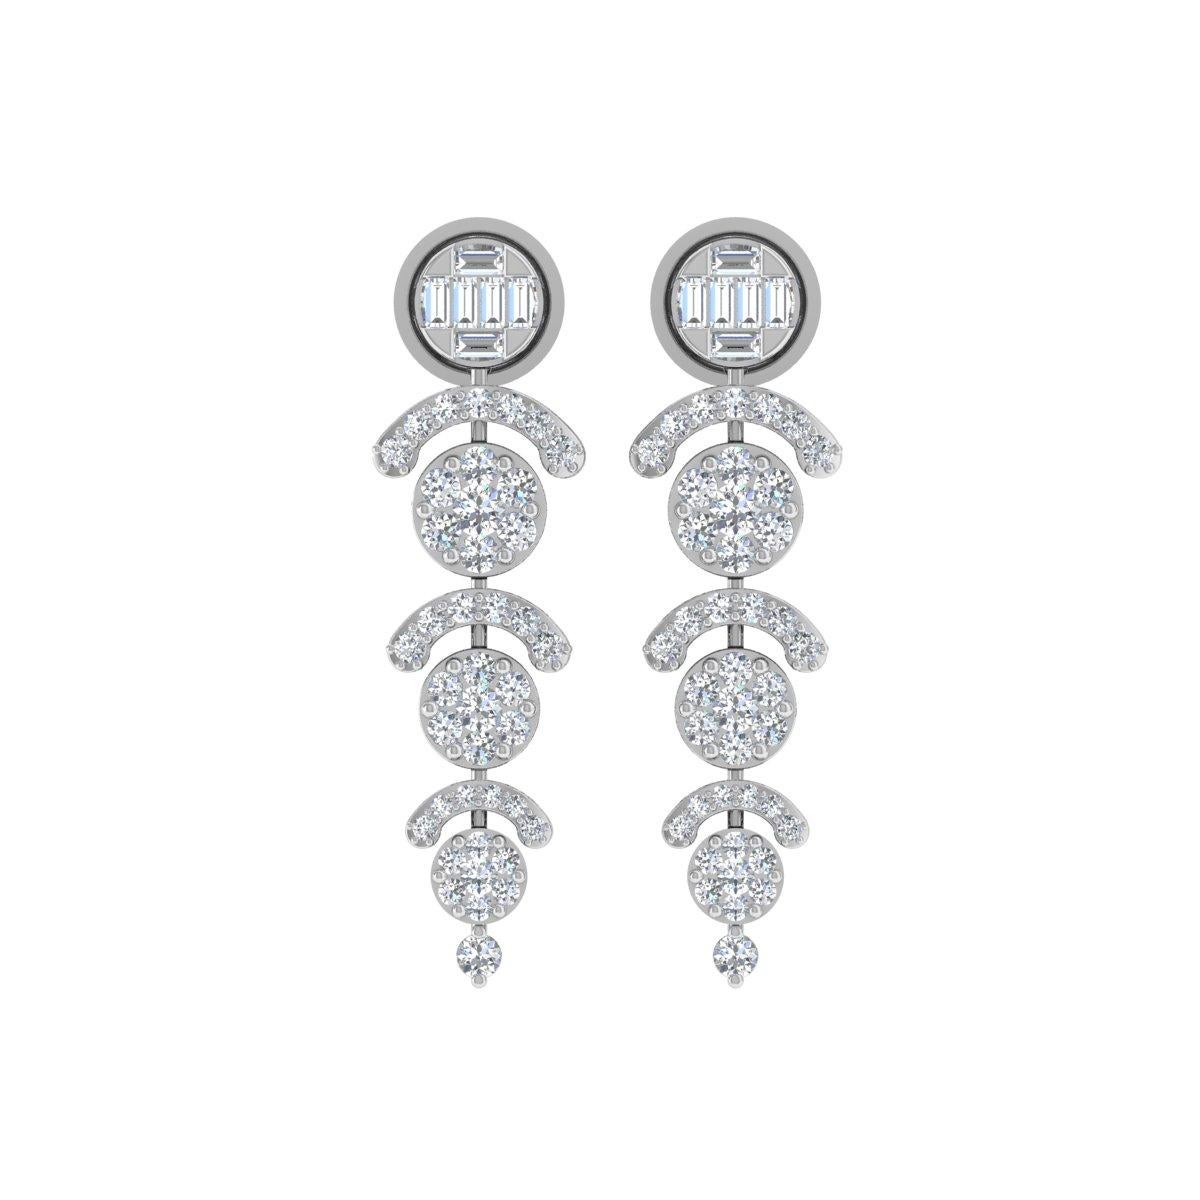 Item Code :- SEE-1660 (14k)
Gross Weight :- 5.25 gm
14k Solid White Gold Weight :- 4.95 gm
Natural Diamond Weight :- 1.52 carat  ( AVERAGE DIAMOND CLARITY SI1-SI2 & COLOR H-I )
Earrings Length :- 33 mm
Earrings Width :- 9 mm

✦